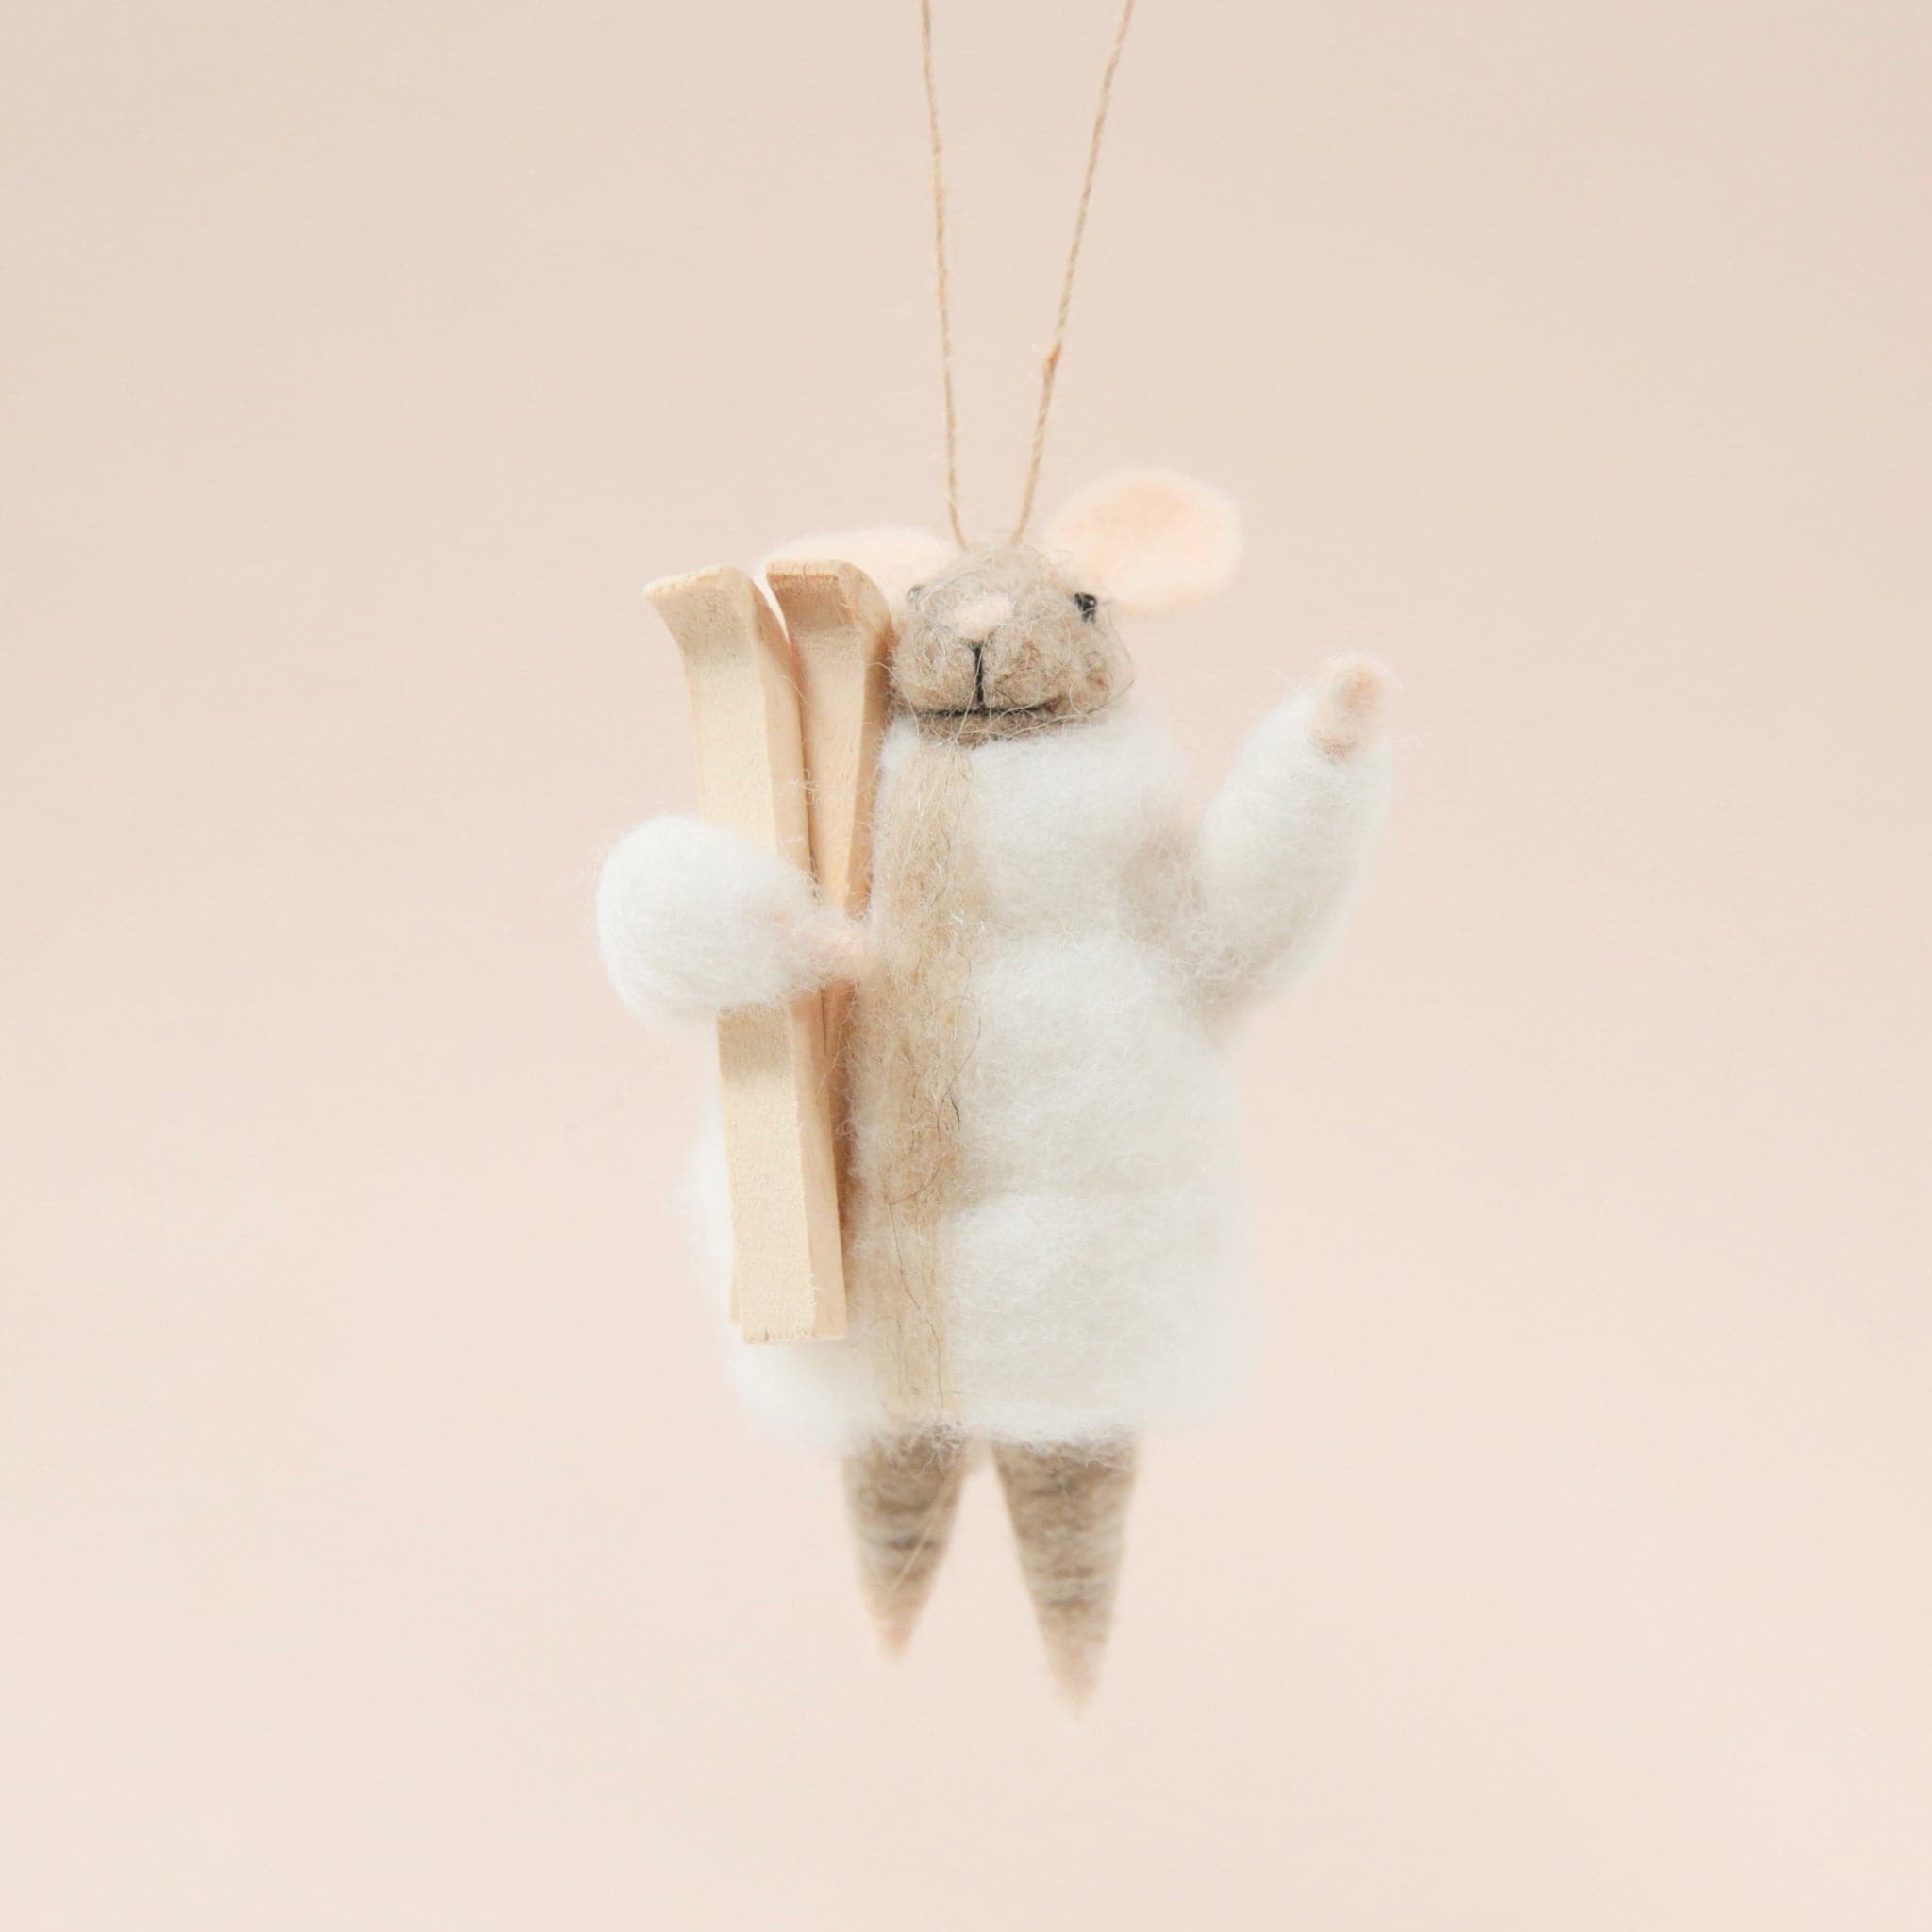 On a light tan background is a brown felt mouse ornament with a white jacket and a pair of a wood skis.